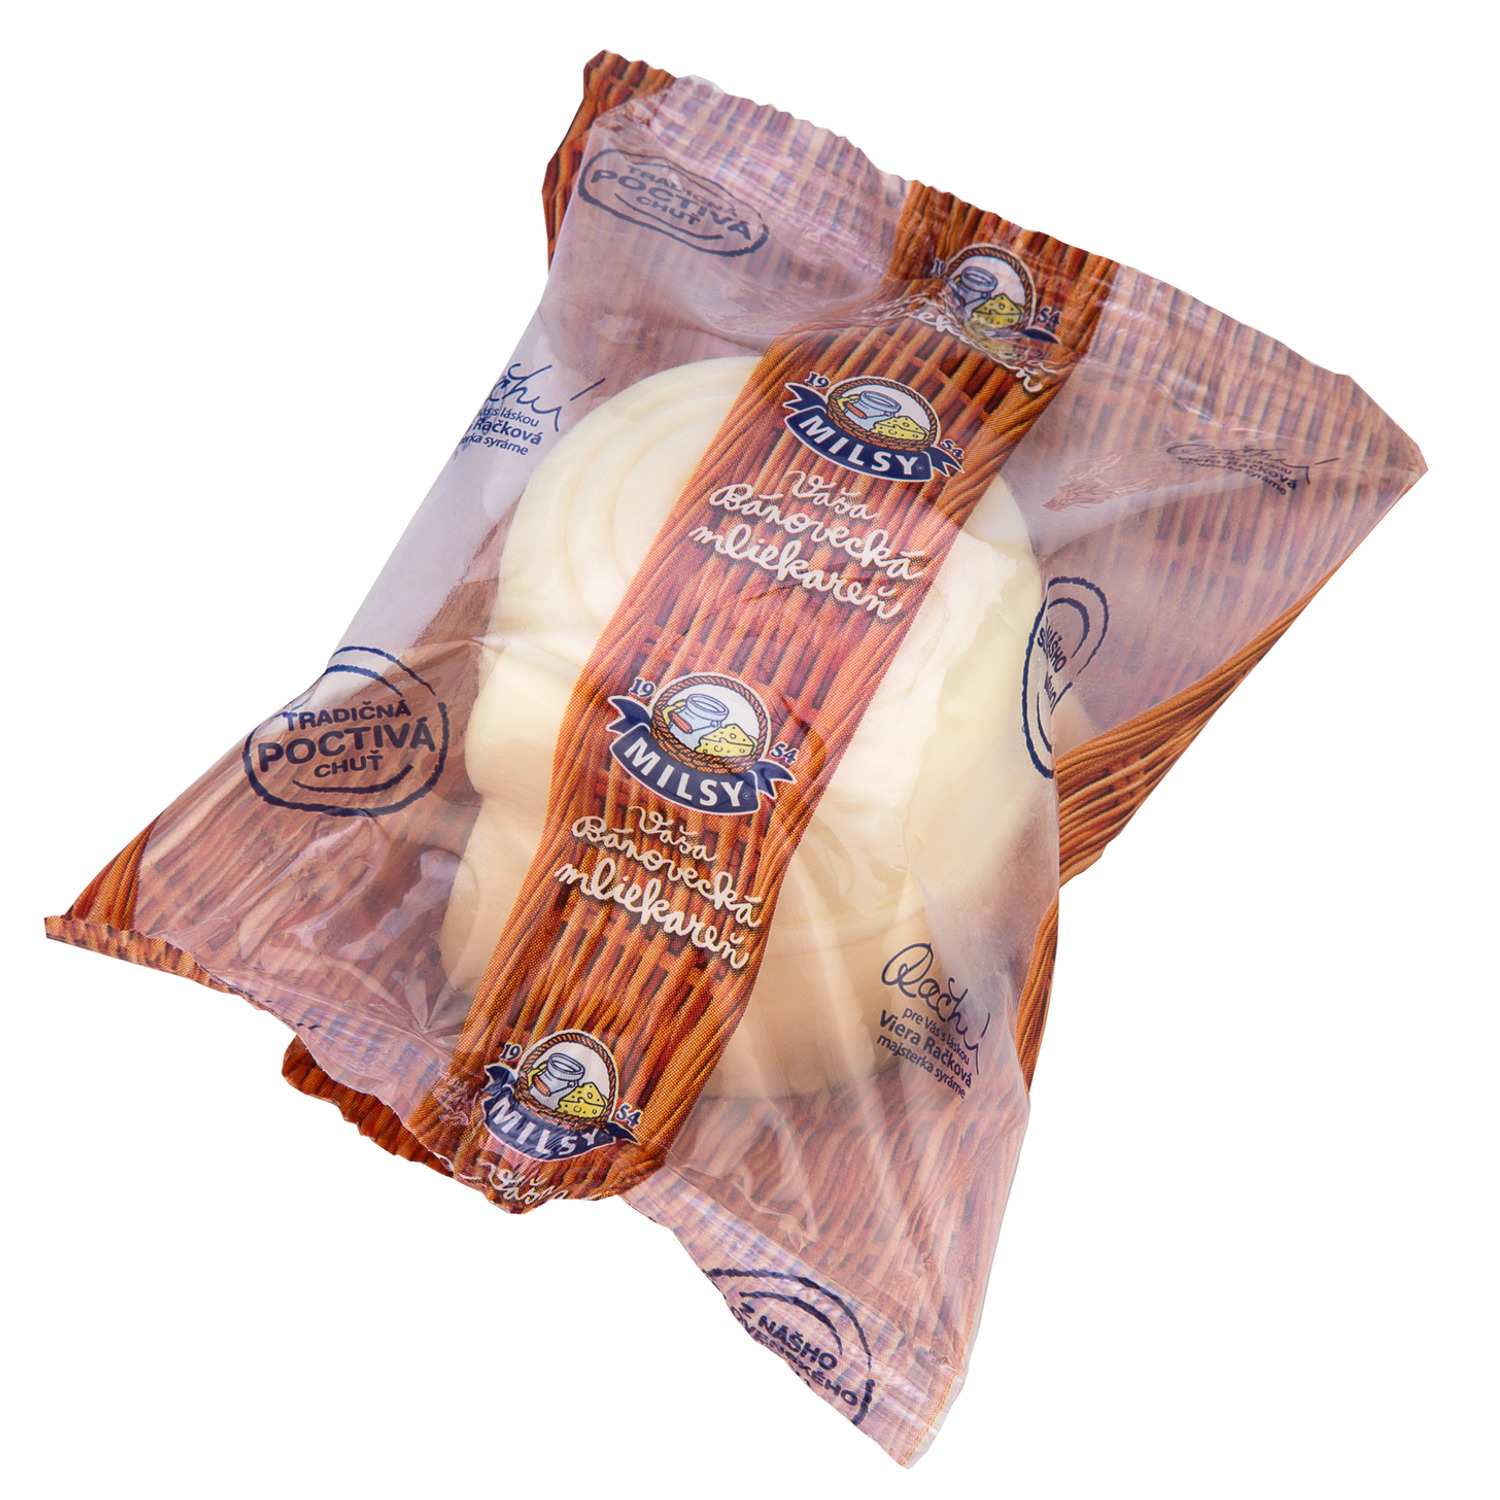 Rolled cheese 120g (Parenica unsmoked cheese)